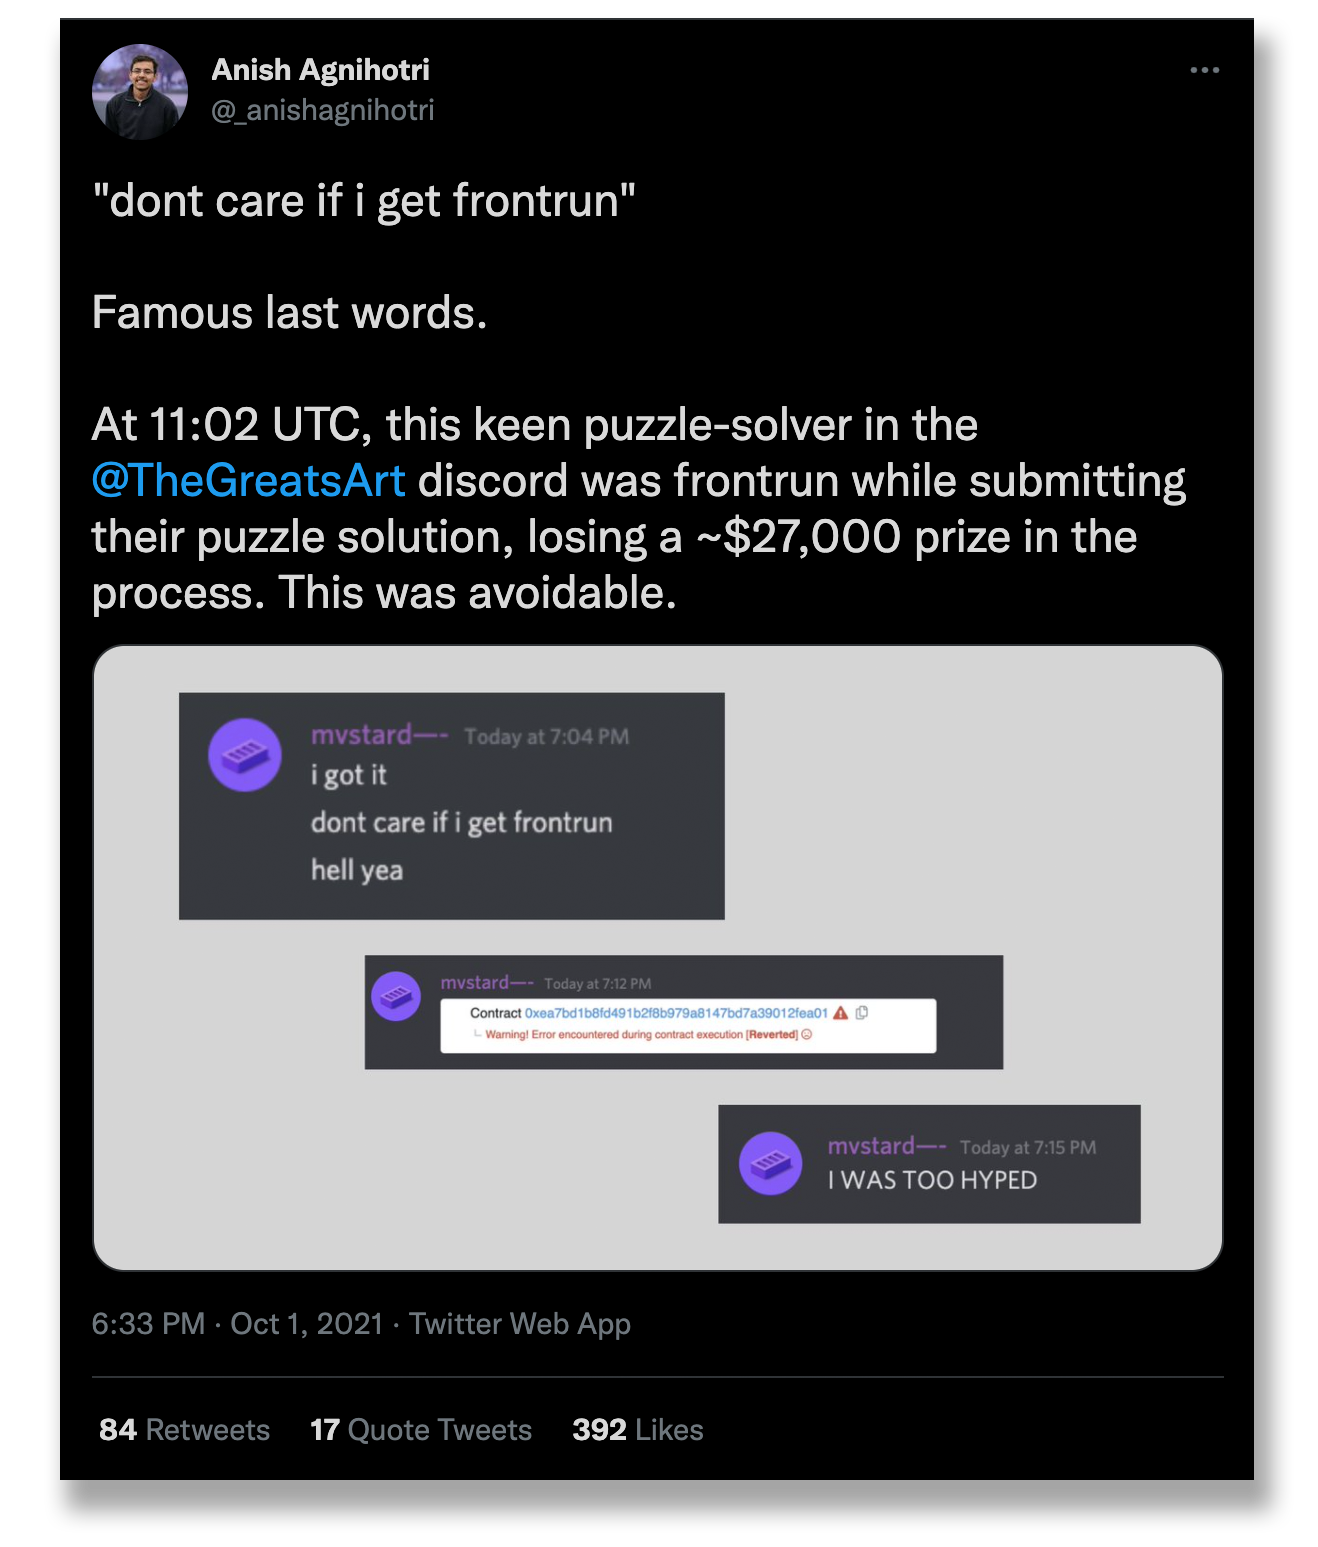 Tweet talking about a puzzle where tens of thousands of dollars were taken because of a frontrun attack